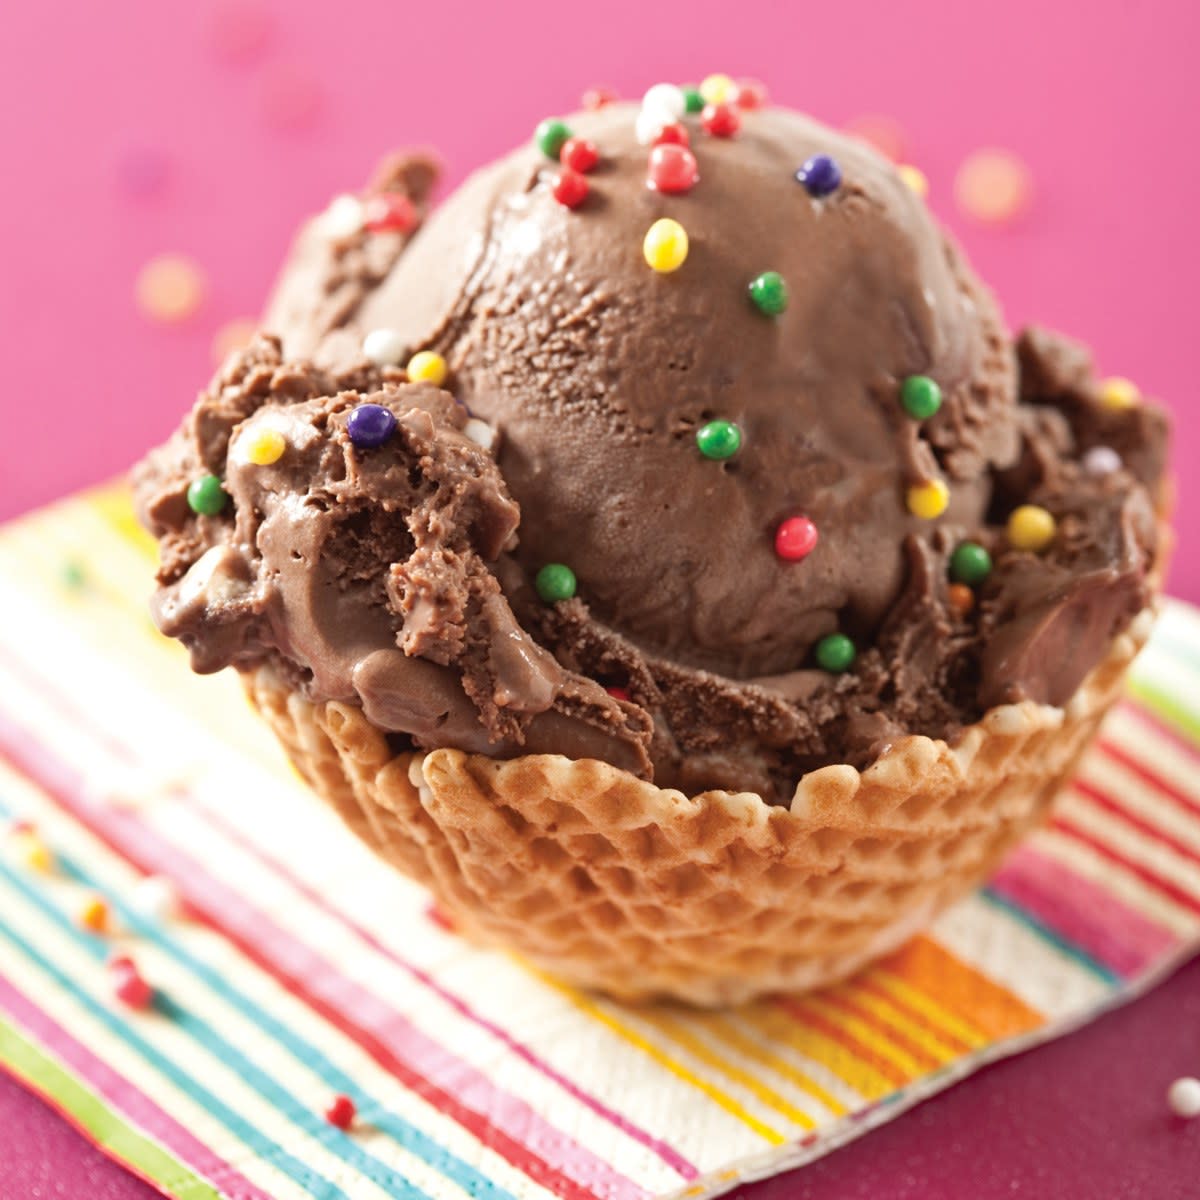 Whip up this simple chocolate ice cream recipe for a treat that will keep you cool all summer long.